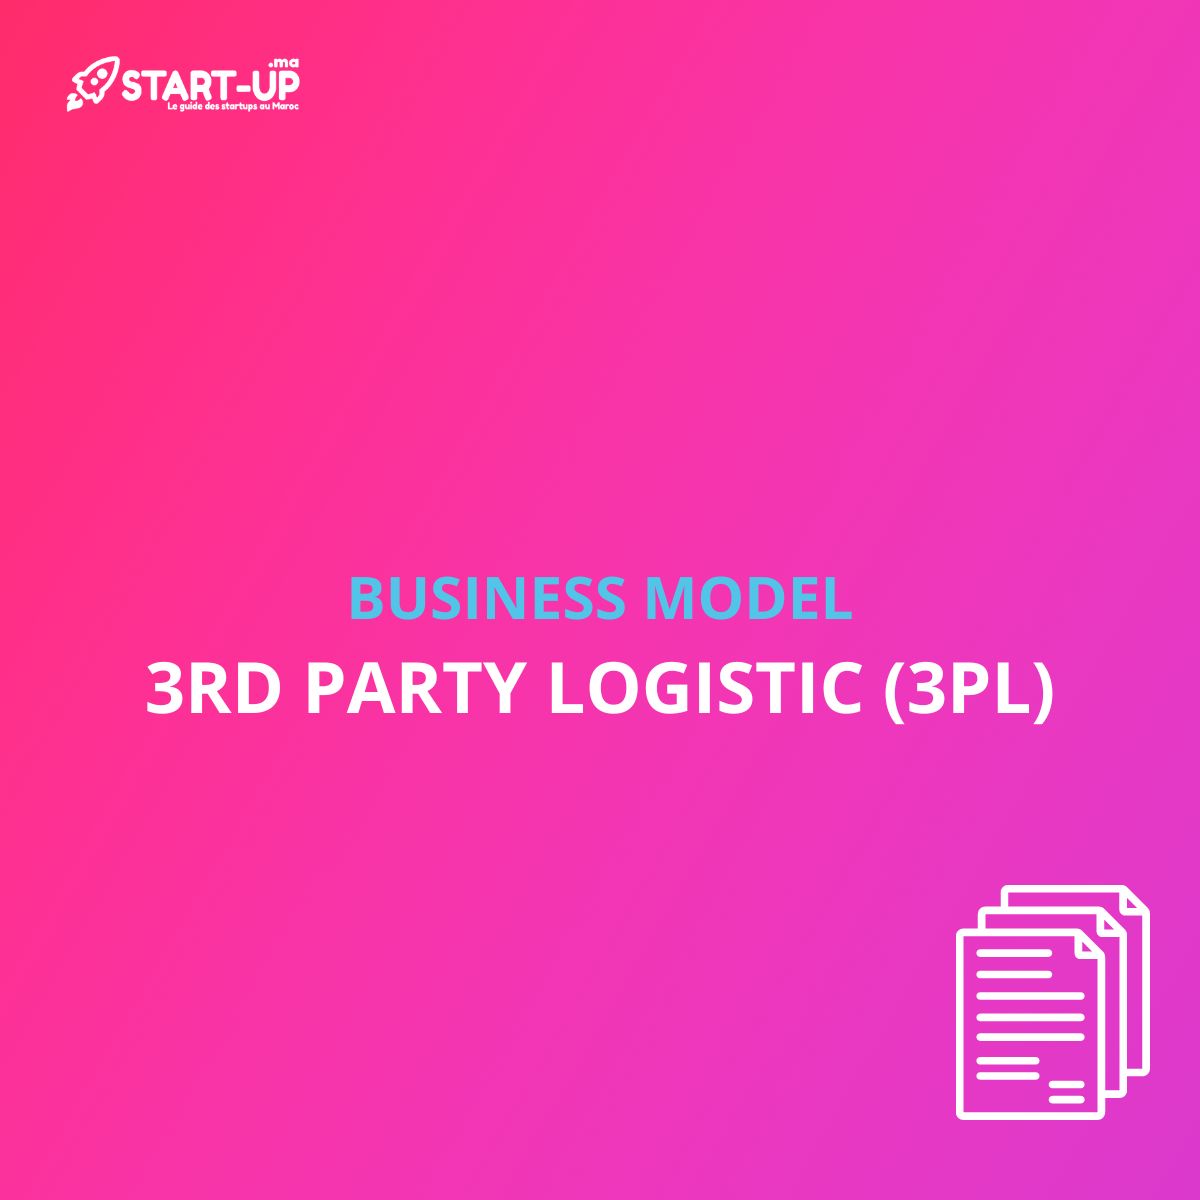 3rd Party Logistic Business Model l Start-up.ma